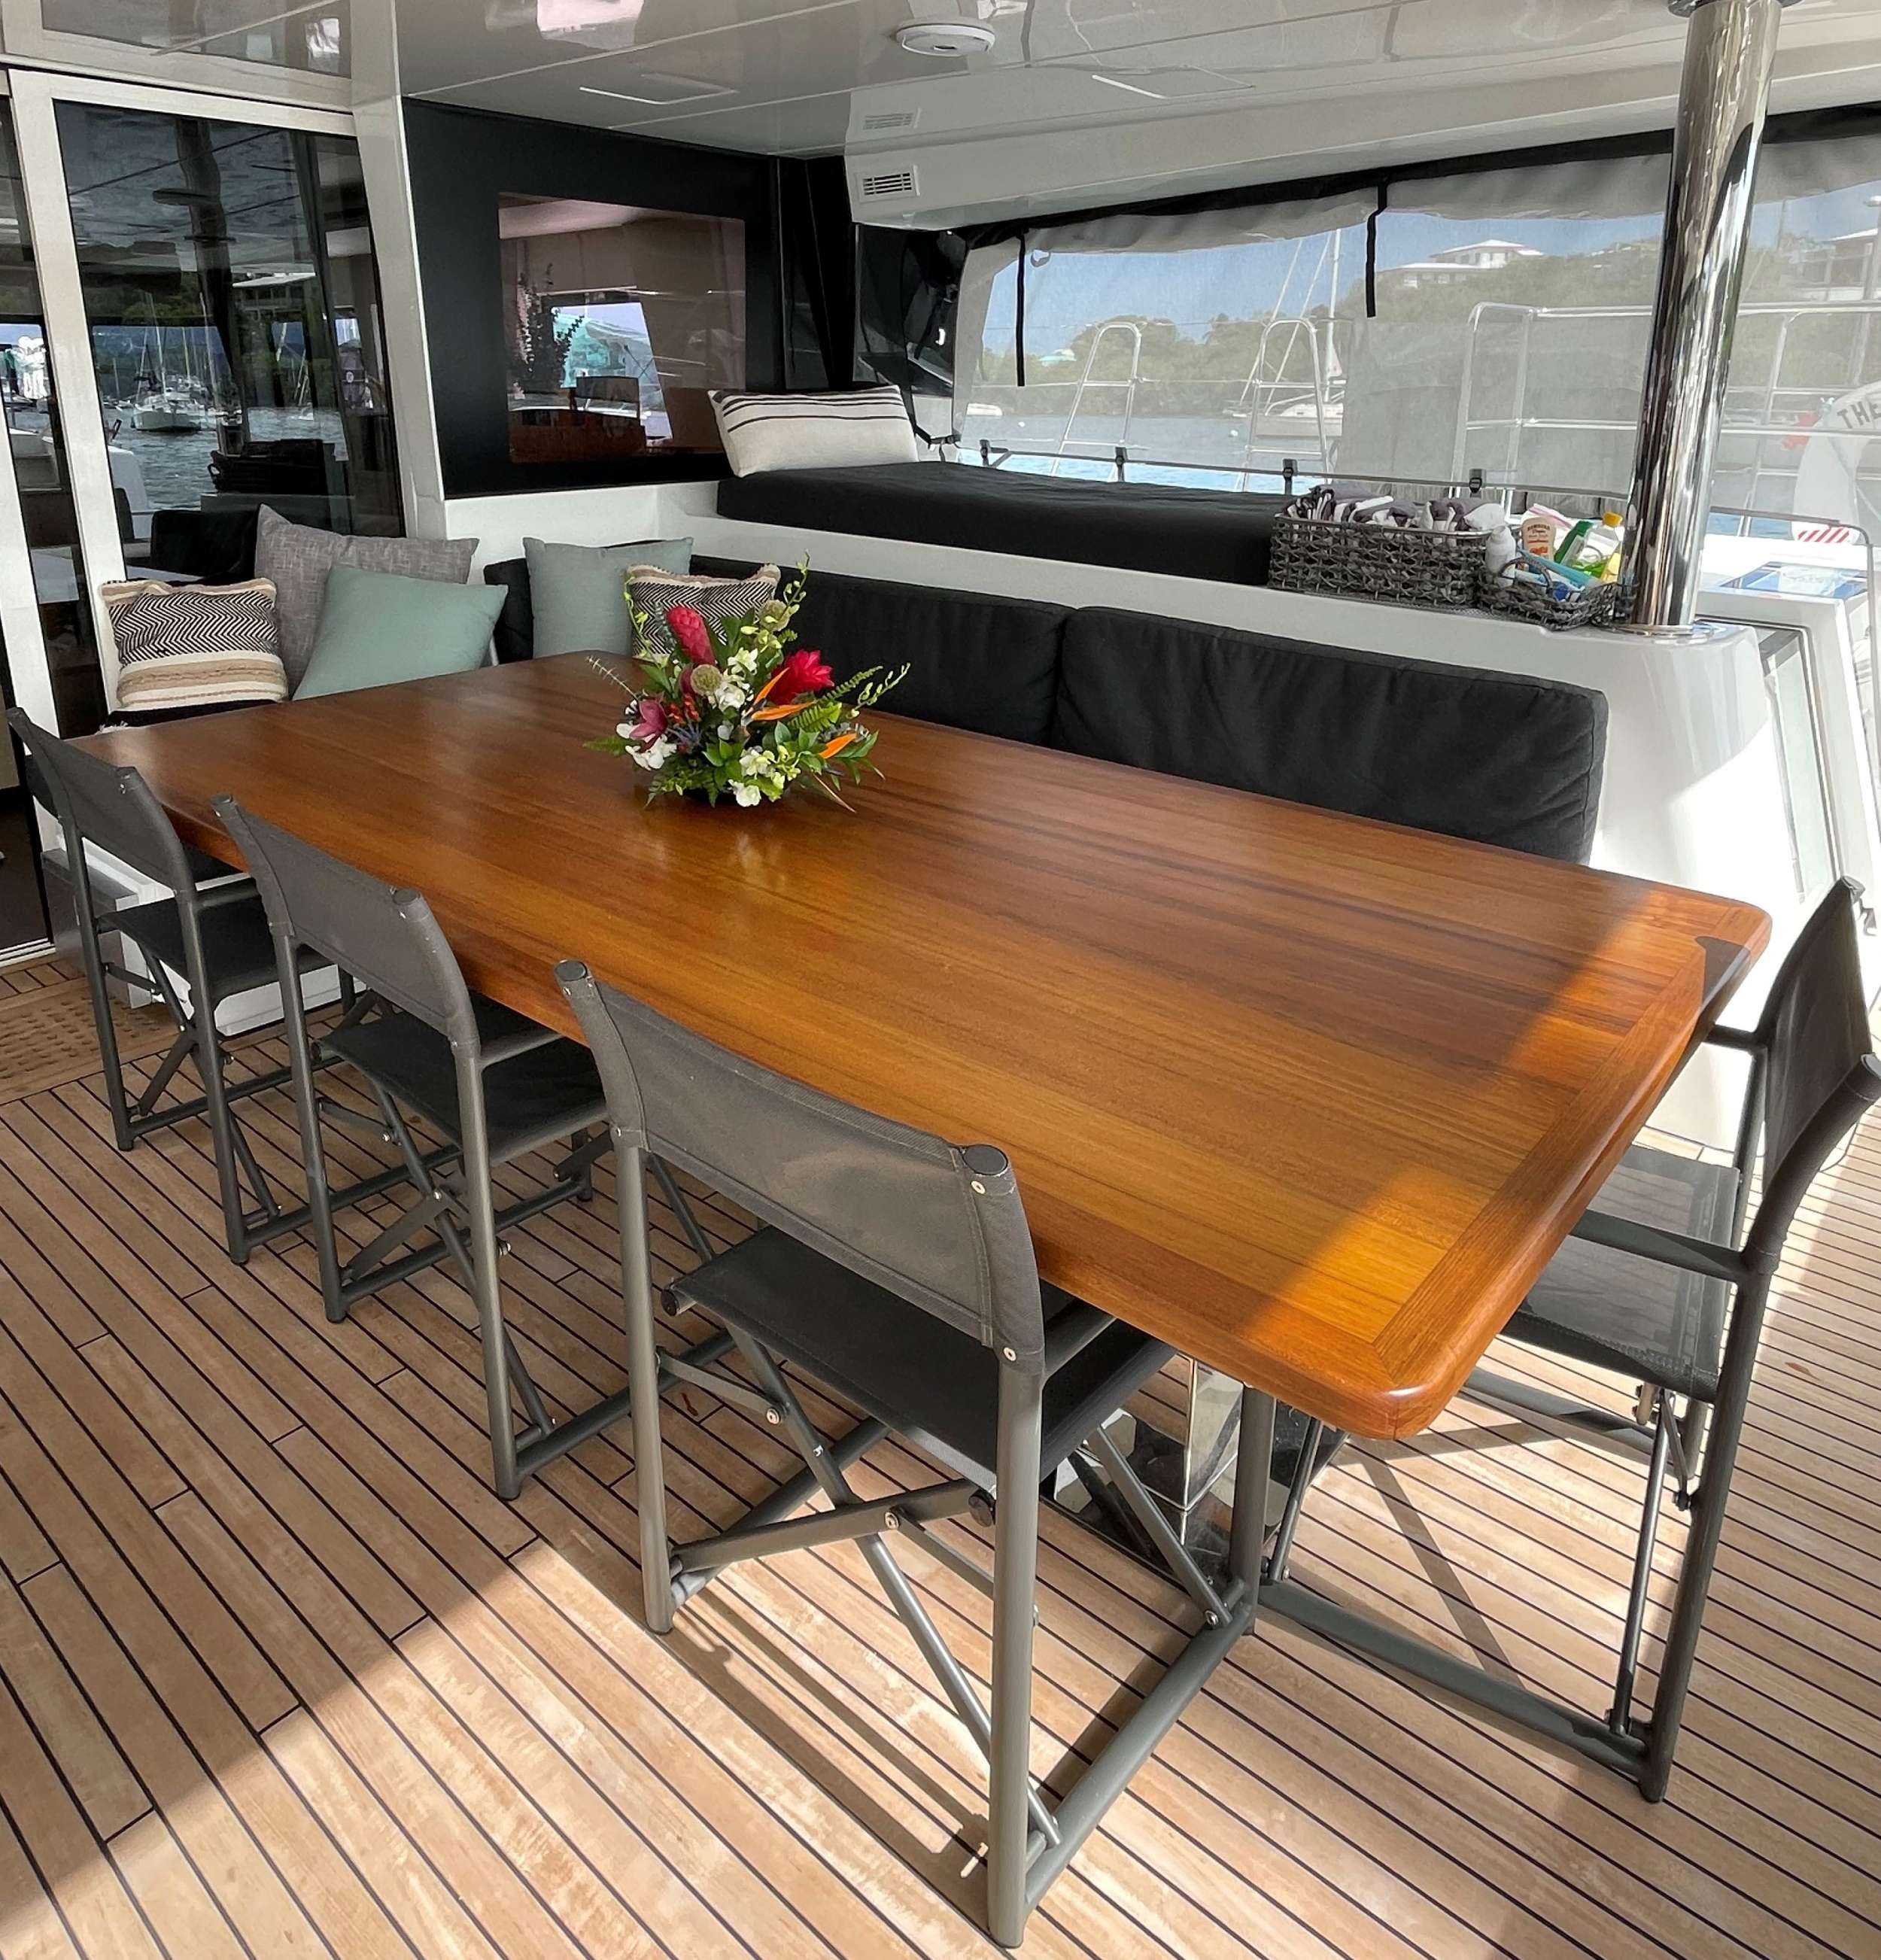 THE PURSUIT Yacht Charter - cockpit dining table